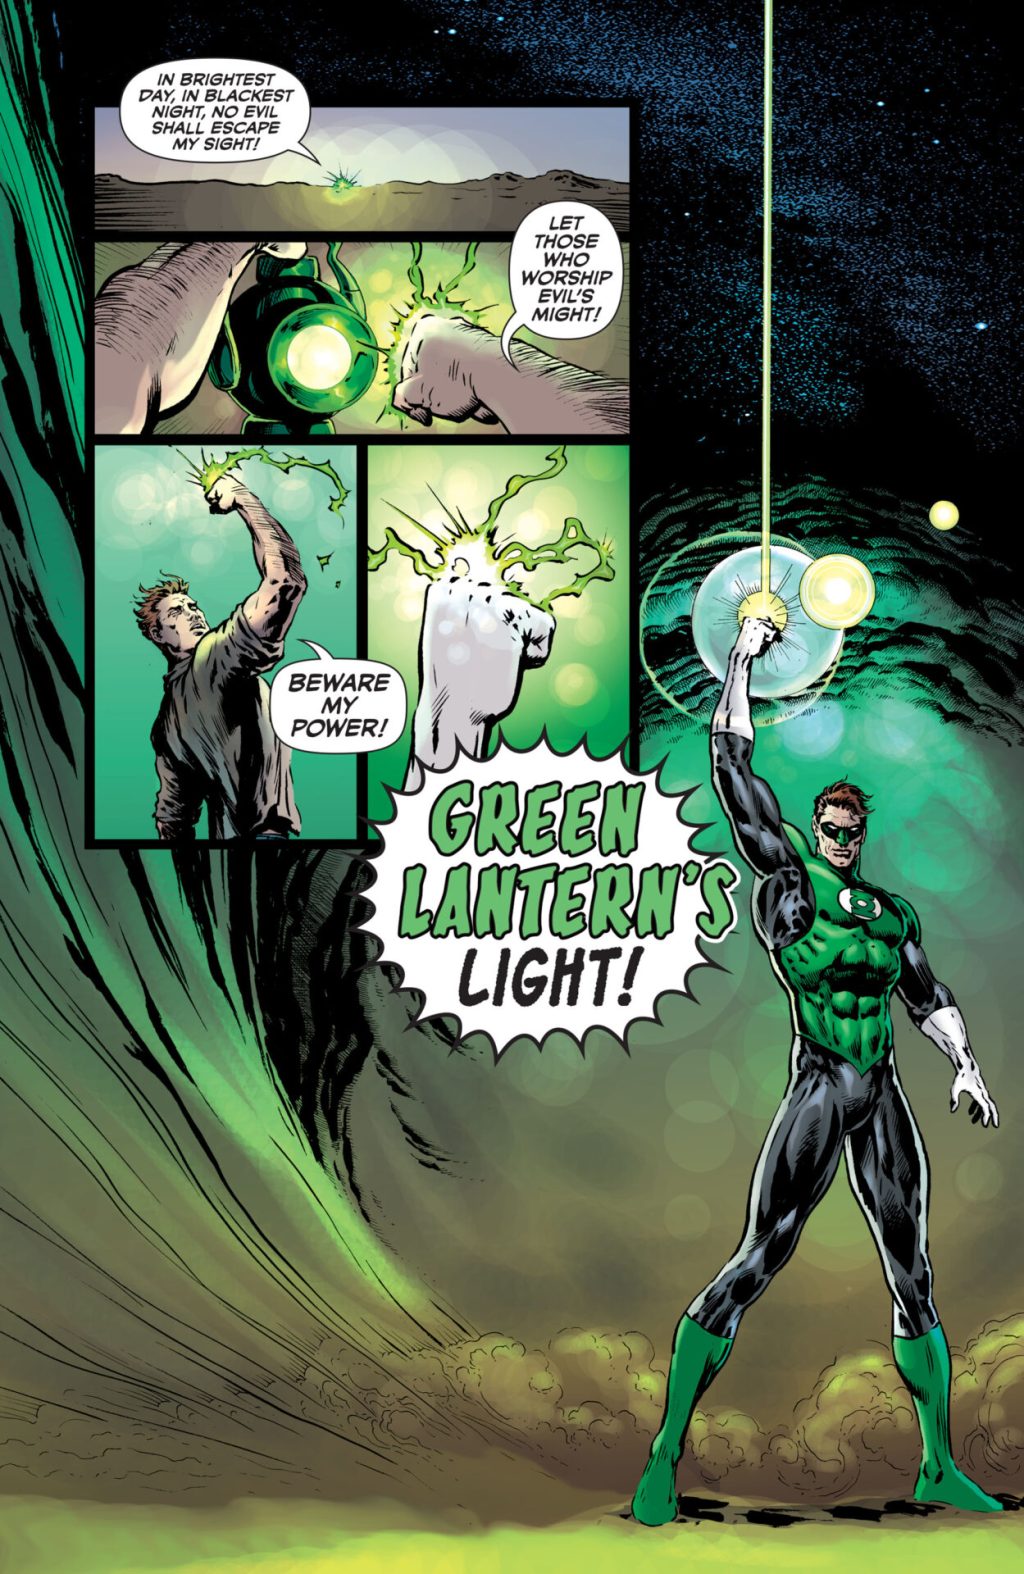 Source: Hal Jordan rides again in The Green Lantern Vol. 1 #1 "Intergalactic Lawman" (2019), DC Comics. Words by Grant Morrison, art by Liam Sharp and Steve Oliff.